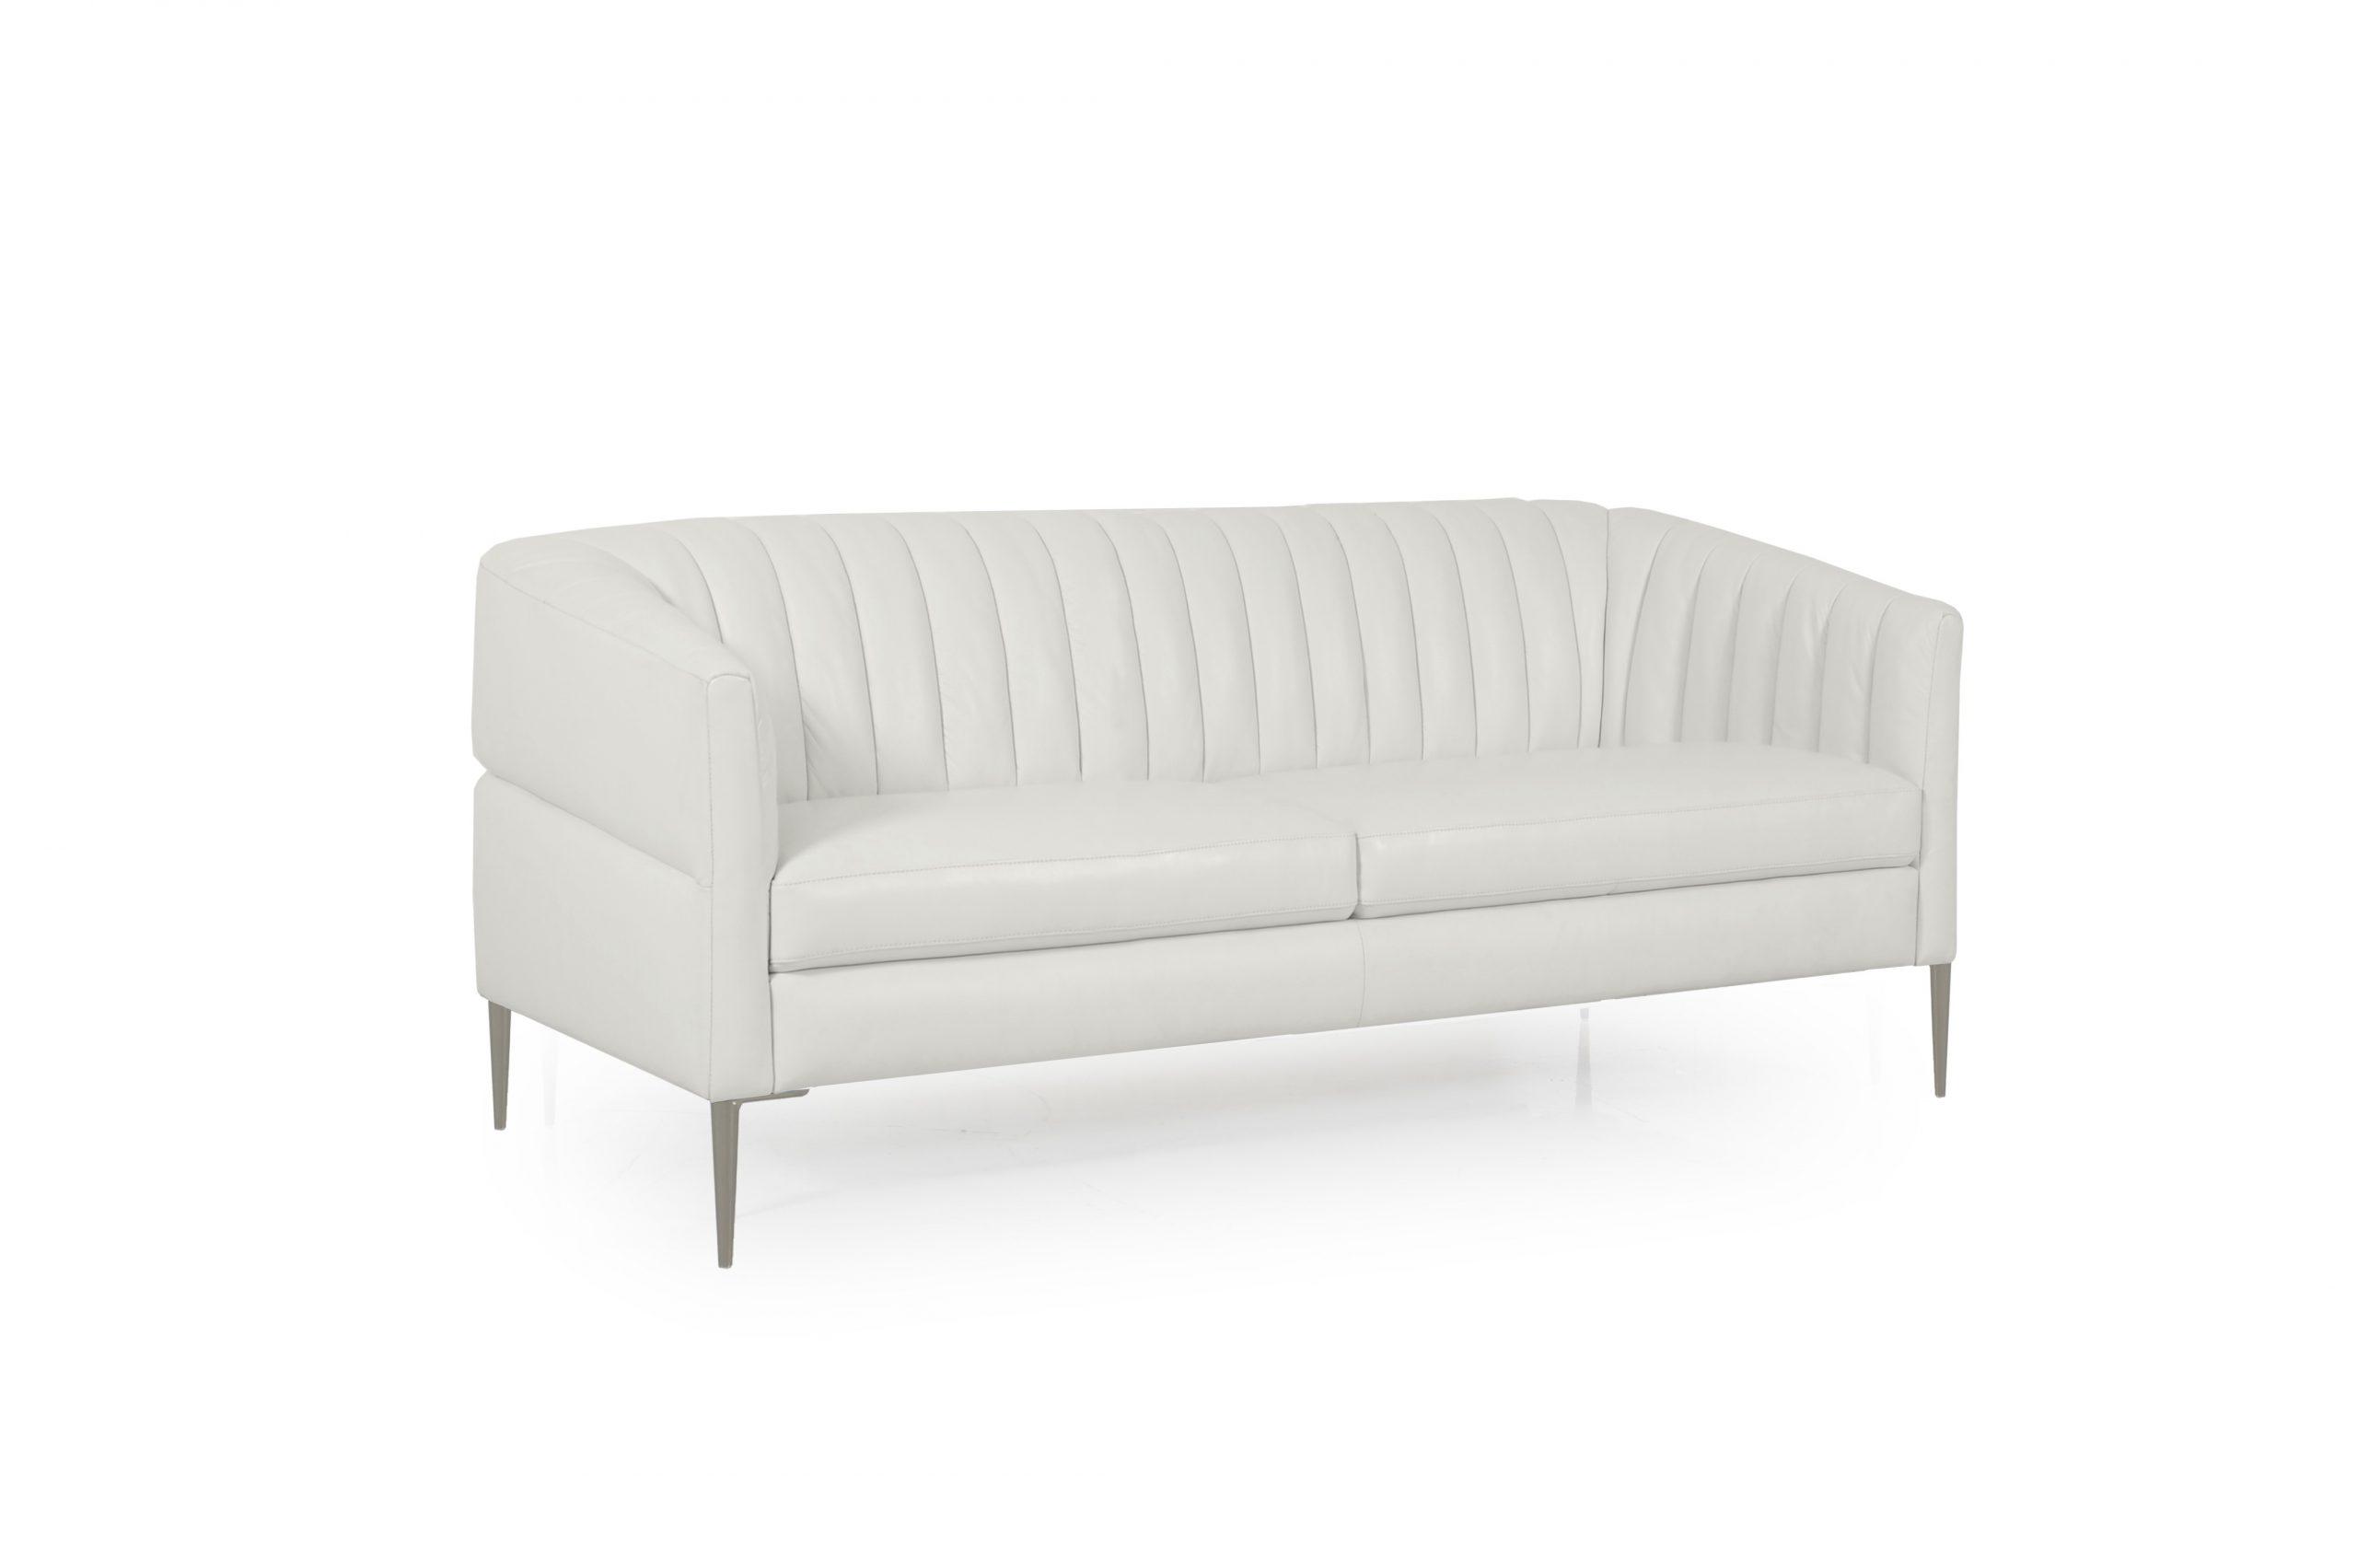 Contemporary, Modern Loveseat 441 - Pearl 44102BS1296 in Pearl White Top grain leather